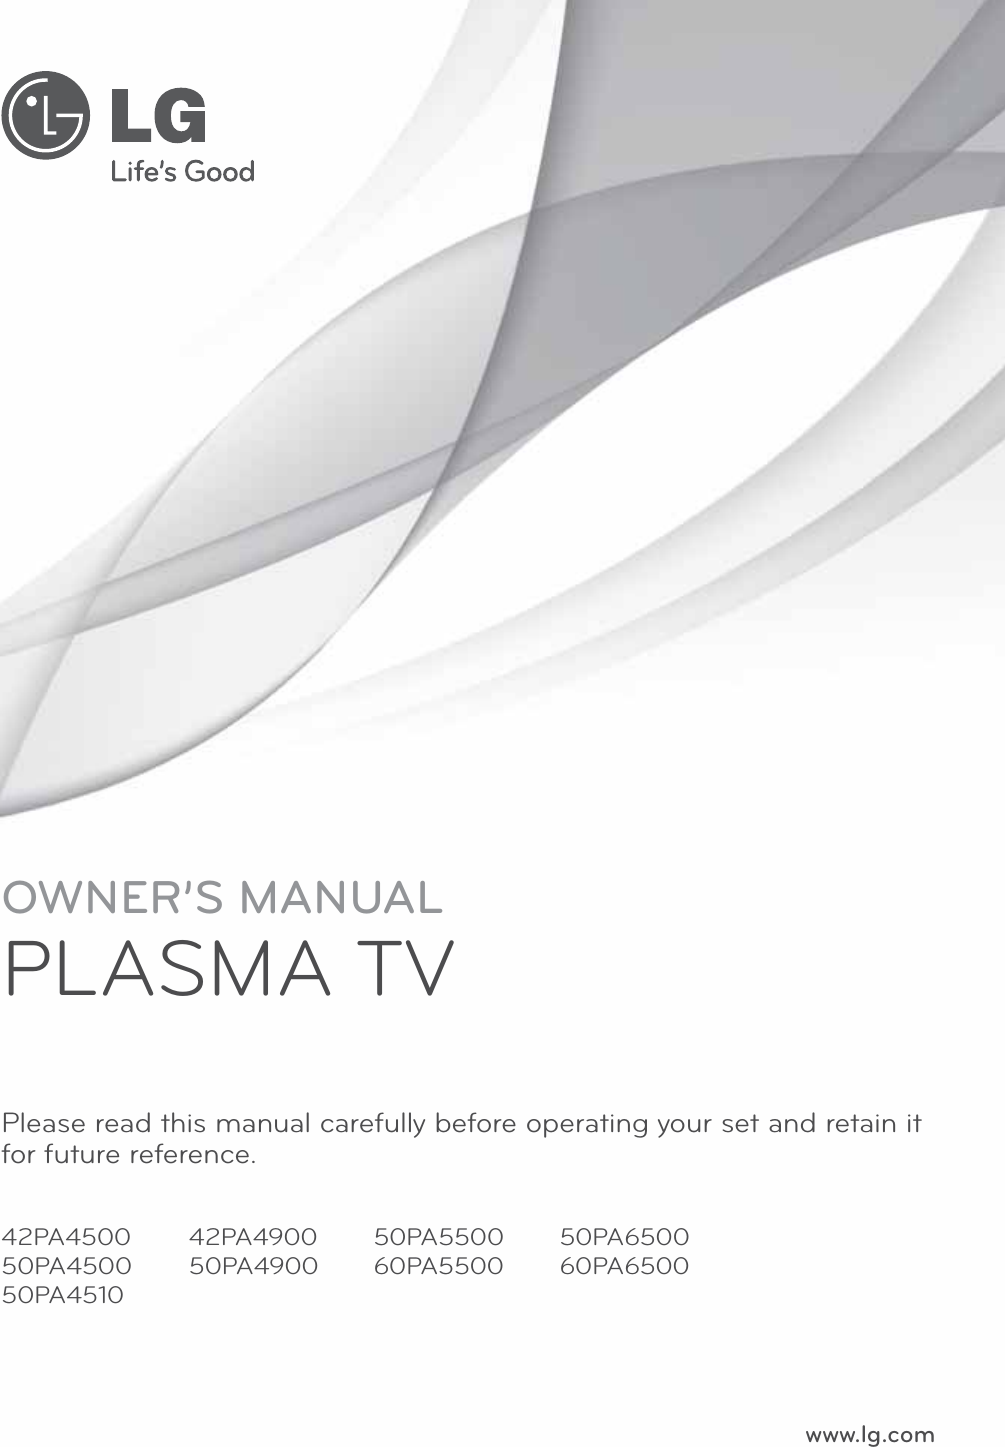 www.lg.comOWNER’S MANUALPLASMA TVPlease read this manual carefully before operating your set and retain it for future reference.42PA450050PA450050PA451050PA550060PA550042PA490050PA490050PA650060PA6500